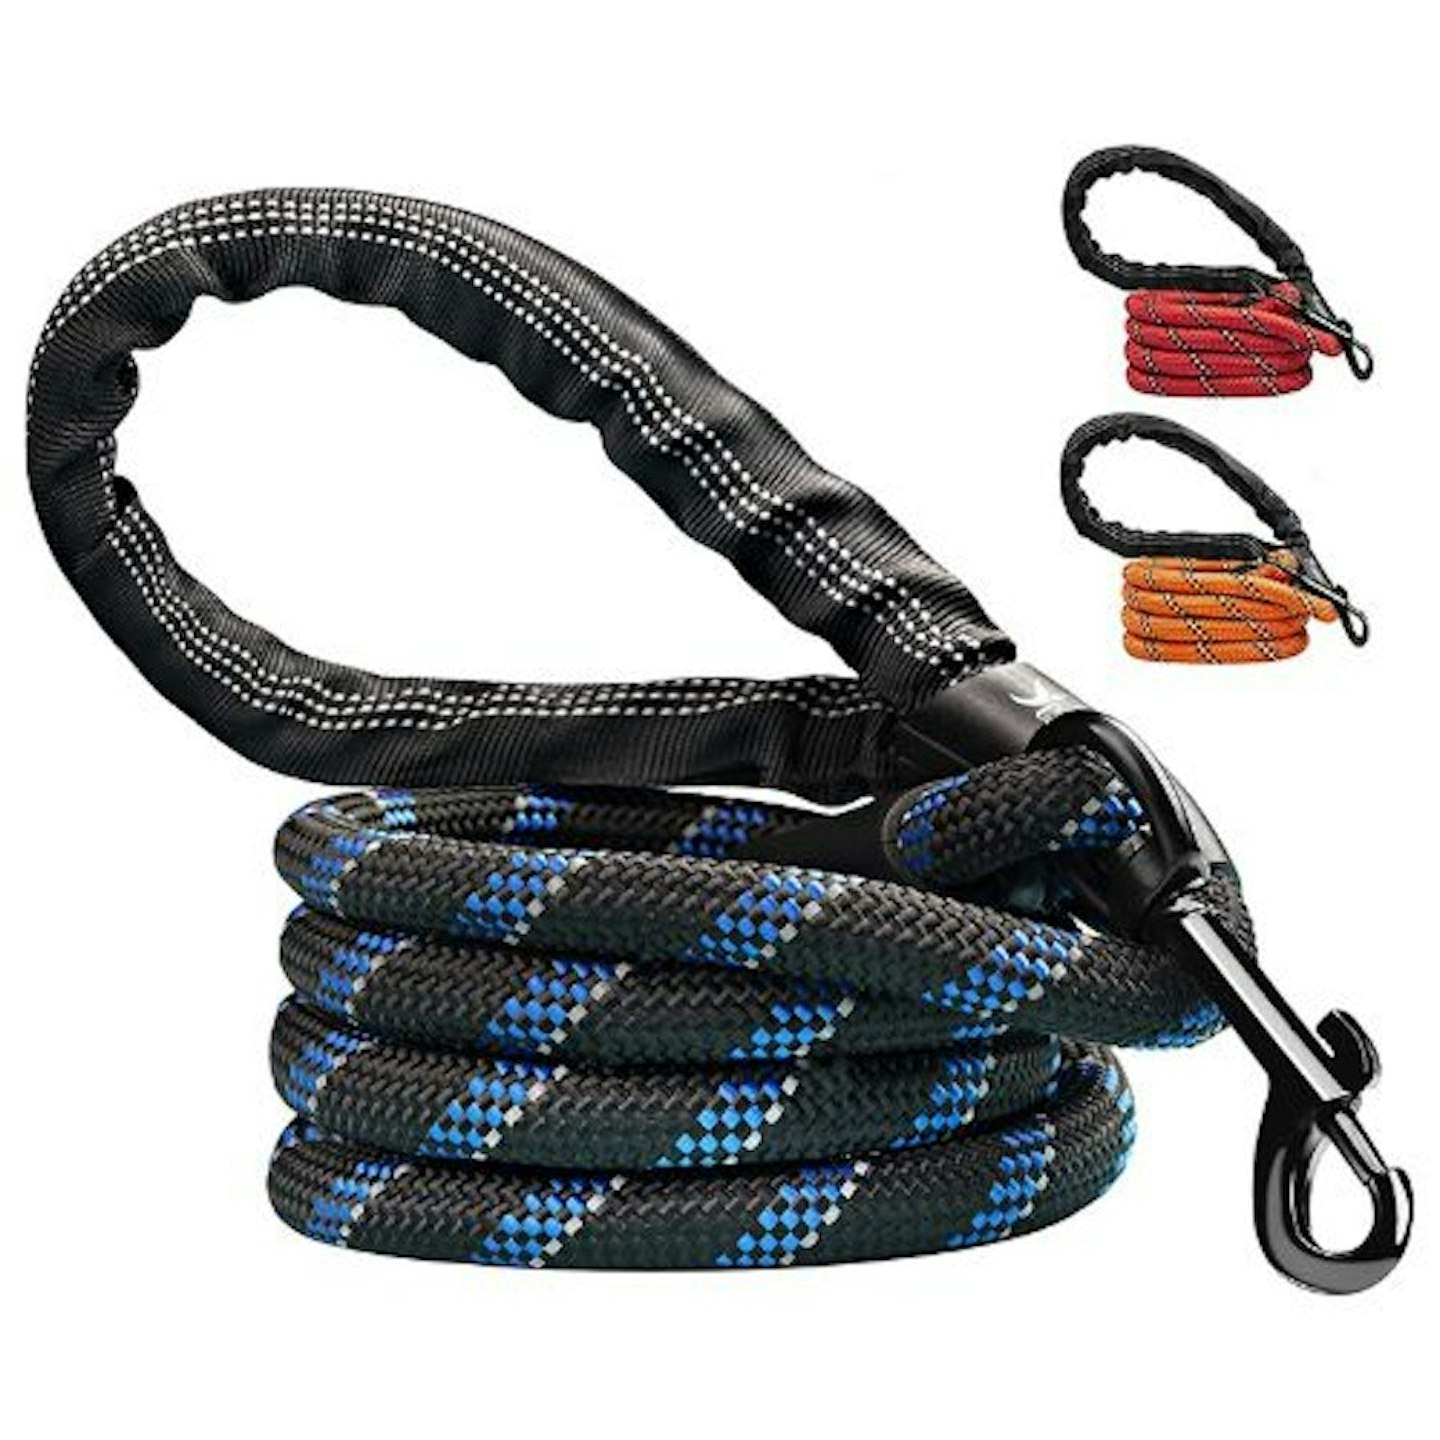 Candure Dog Lead with Soft Padded and Anti Slip Comfortable Rope Handle